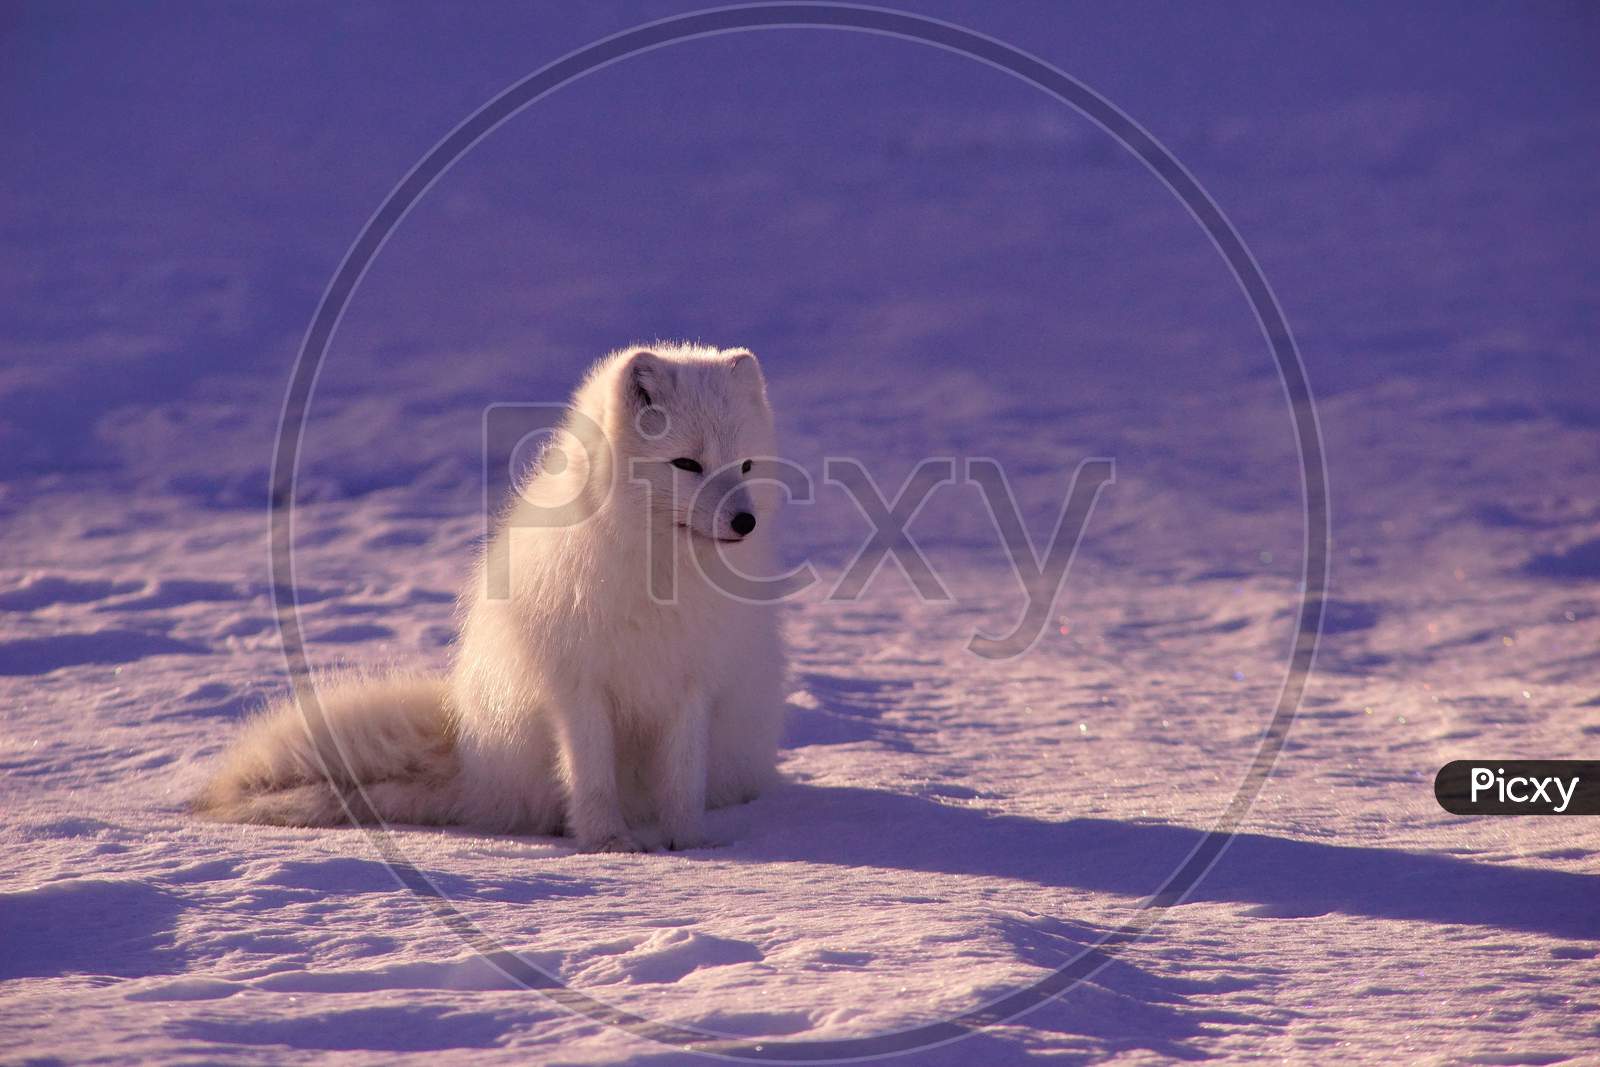 Furry white polar bear seated on ice land during winter weather